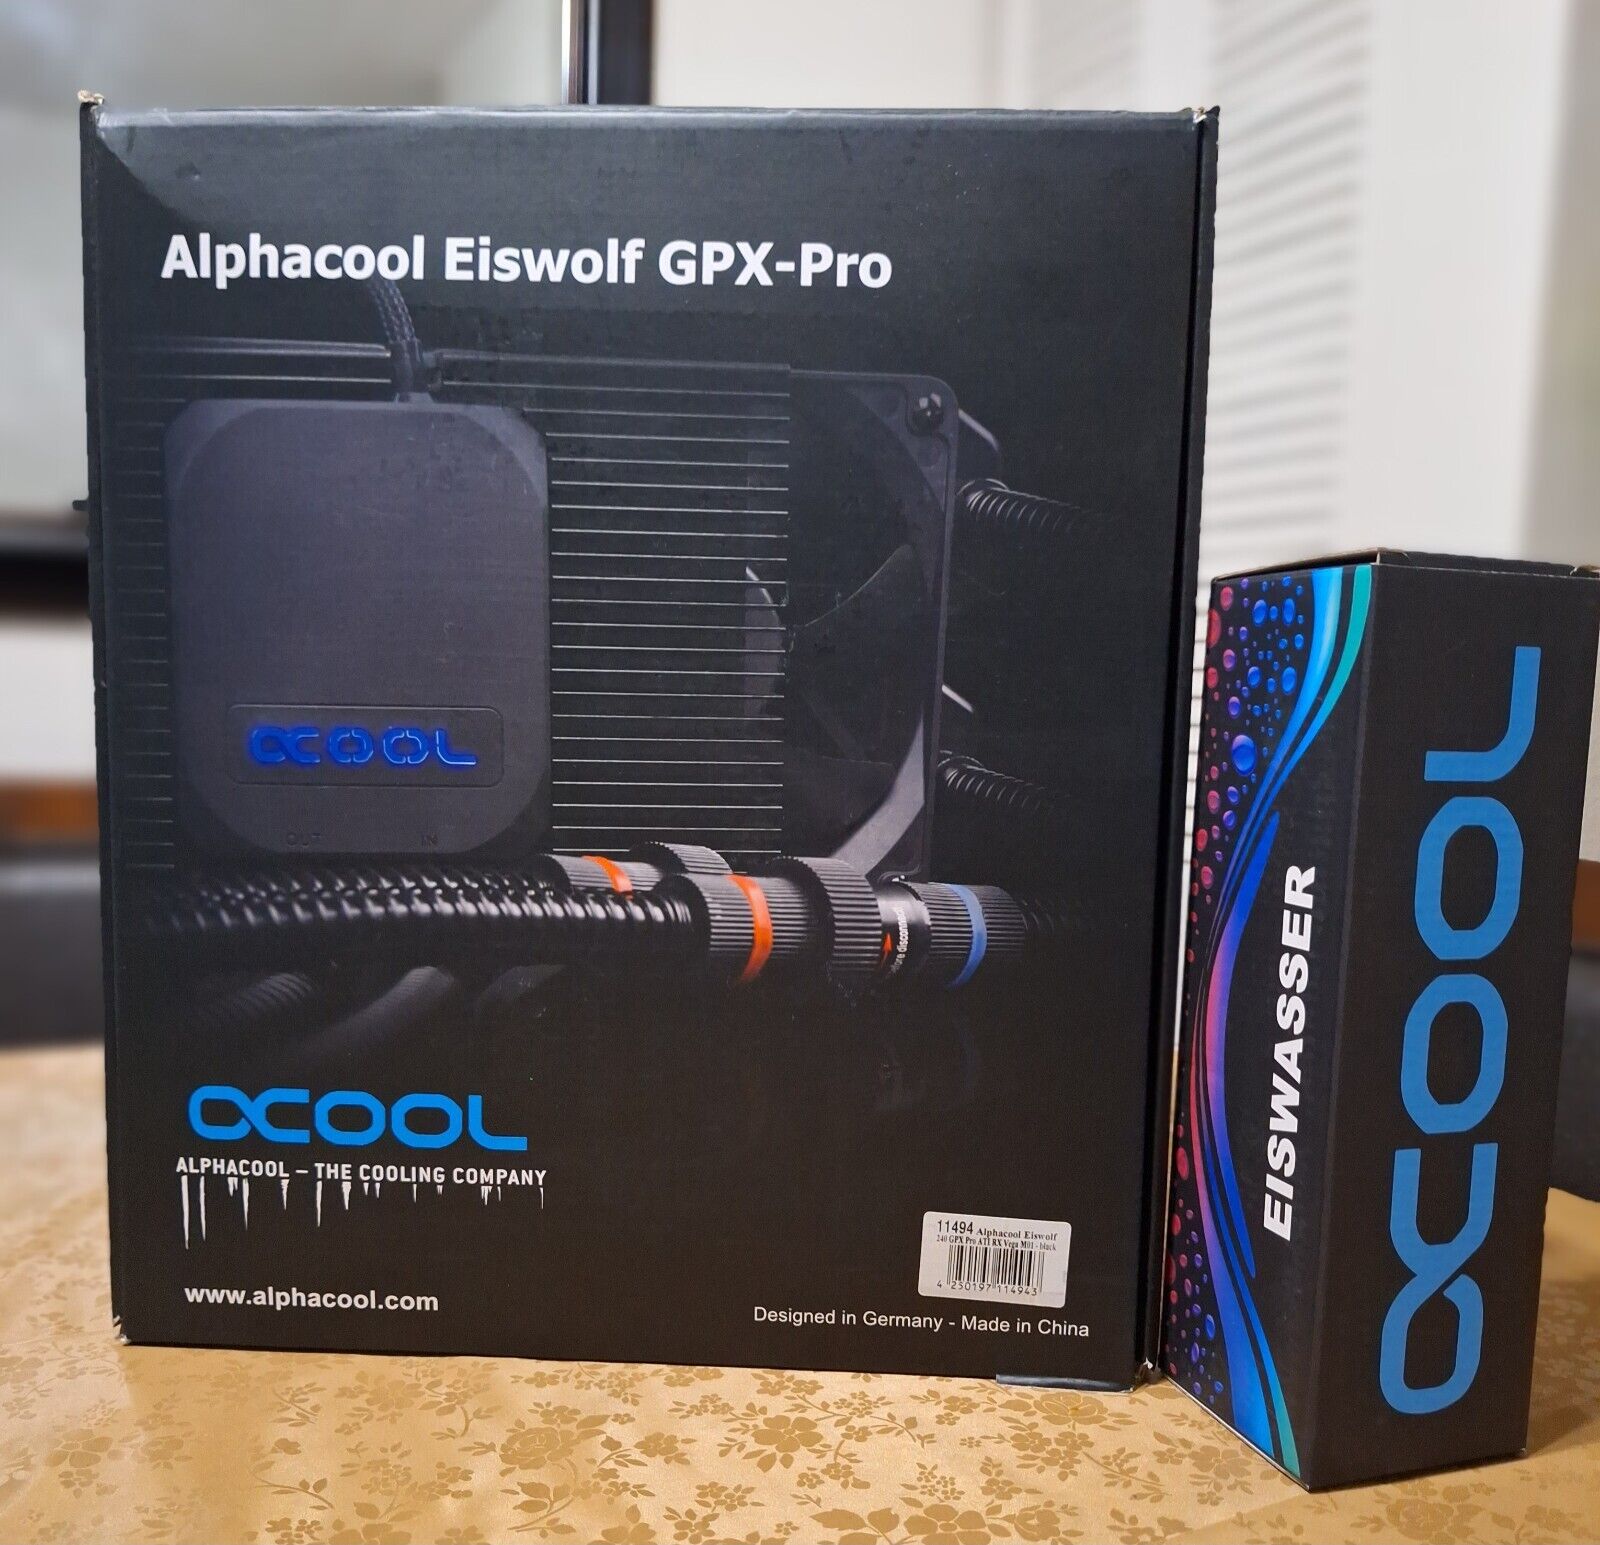 Alphacool Eiswolf GPX-PRO.GPX-A Vega pro M01 and EISWASSER BOTLE .